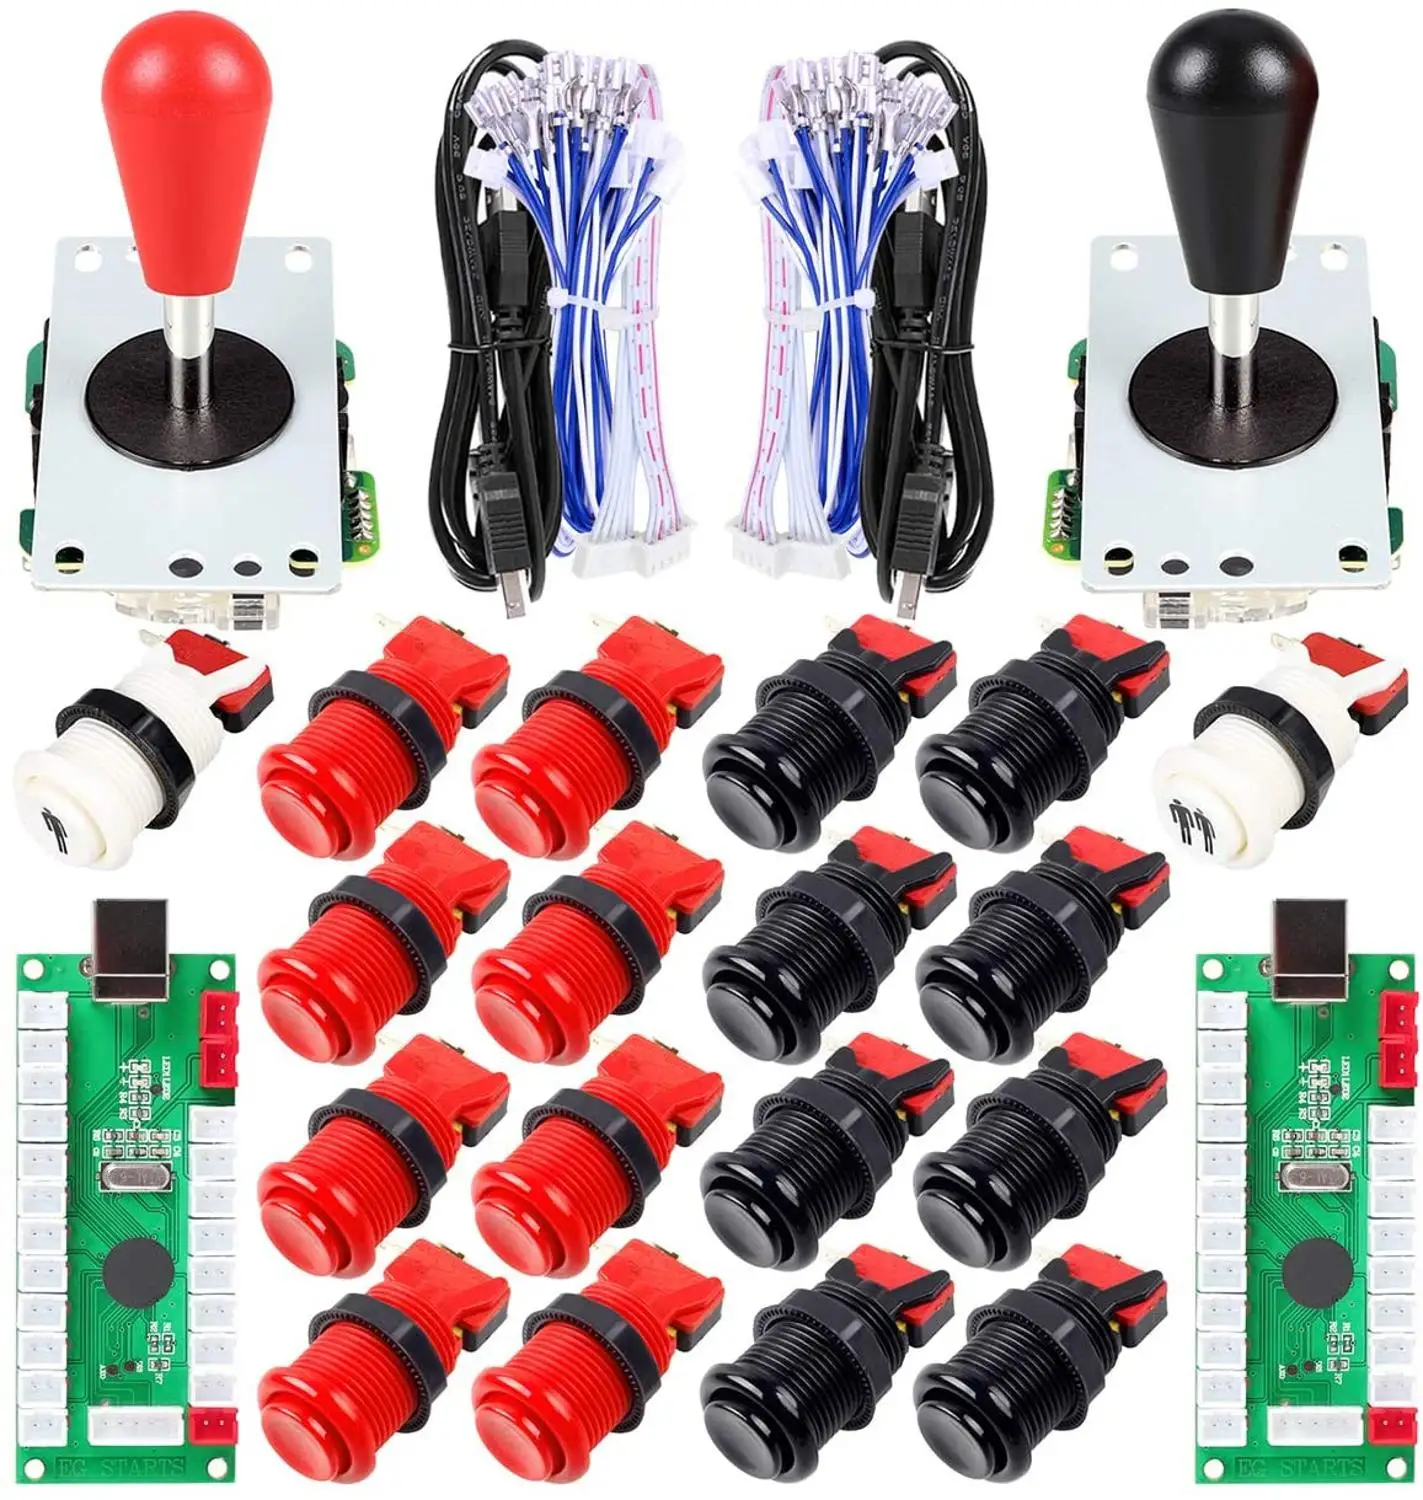 

EG Starts 2 Player Ellipse Oval Arcade Joystick + American Style Happ Type Arcade Buttons for PC MAME Raspberry Pi Red Black